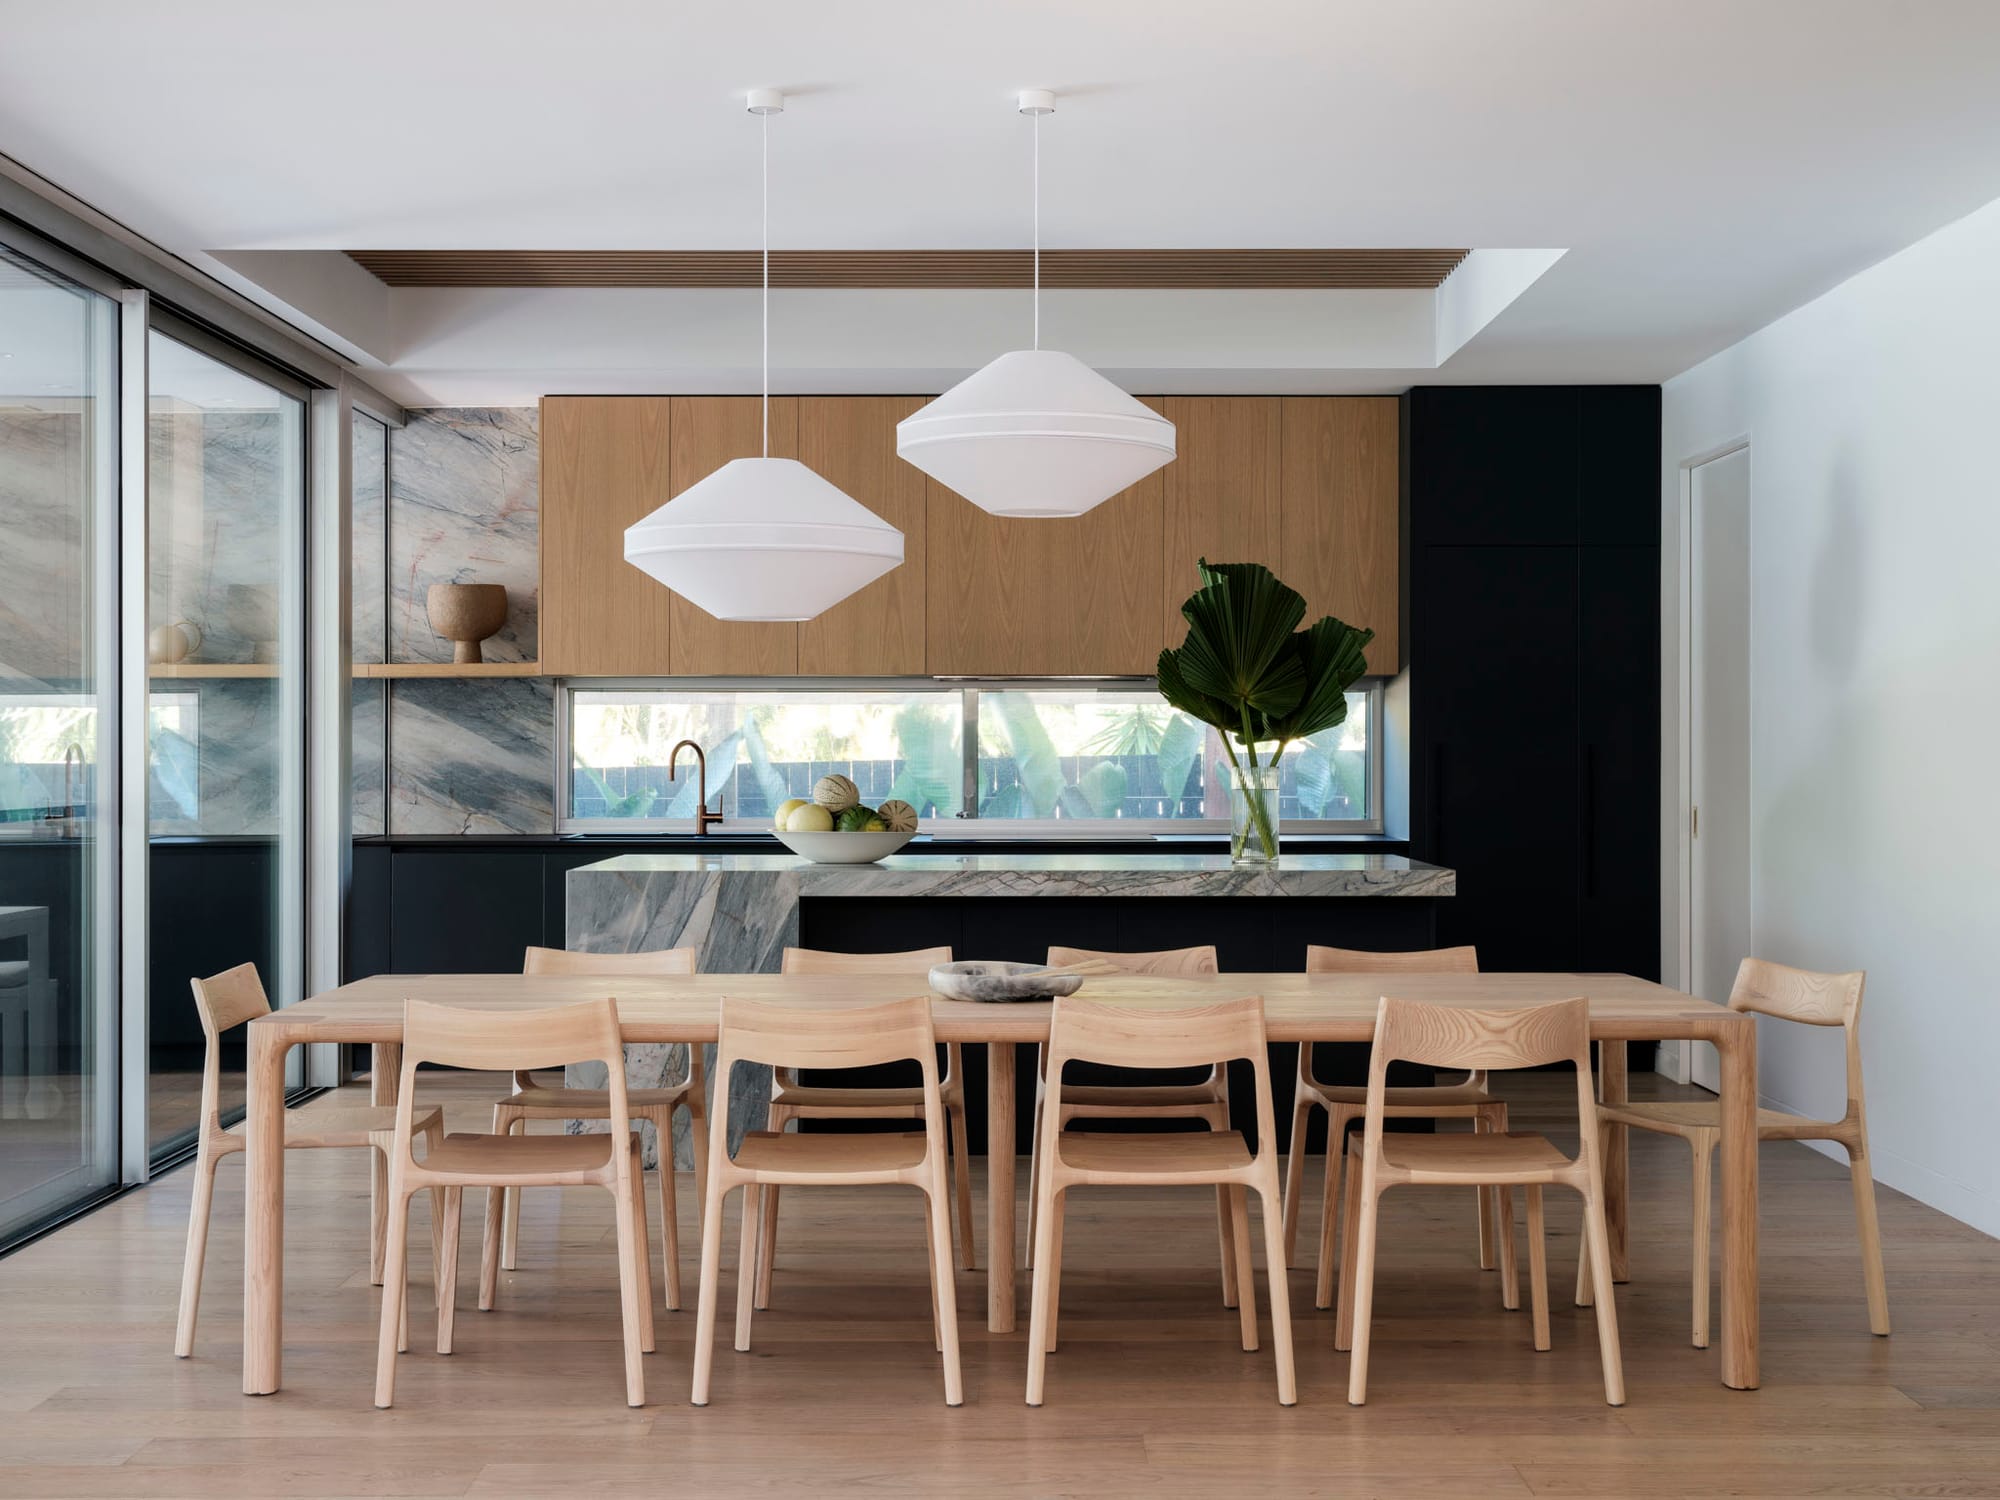 Kasa Byron Bay. Photography by Tom Ferguson. Large timber dining setting in front of contemporary kitchen. Black cabinetry and stone splashback and countertops. Two large white pendant lights.